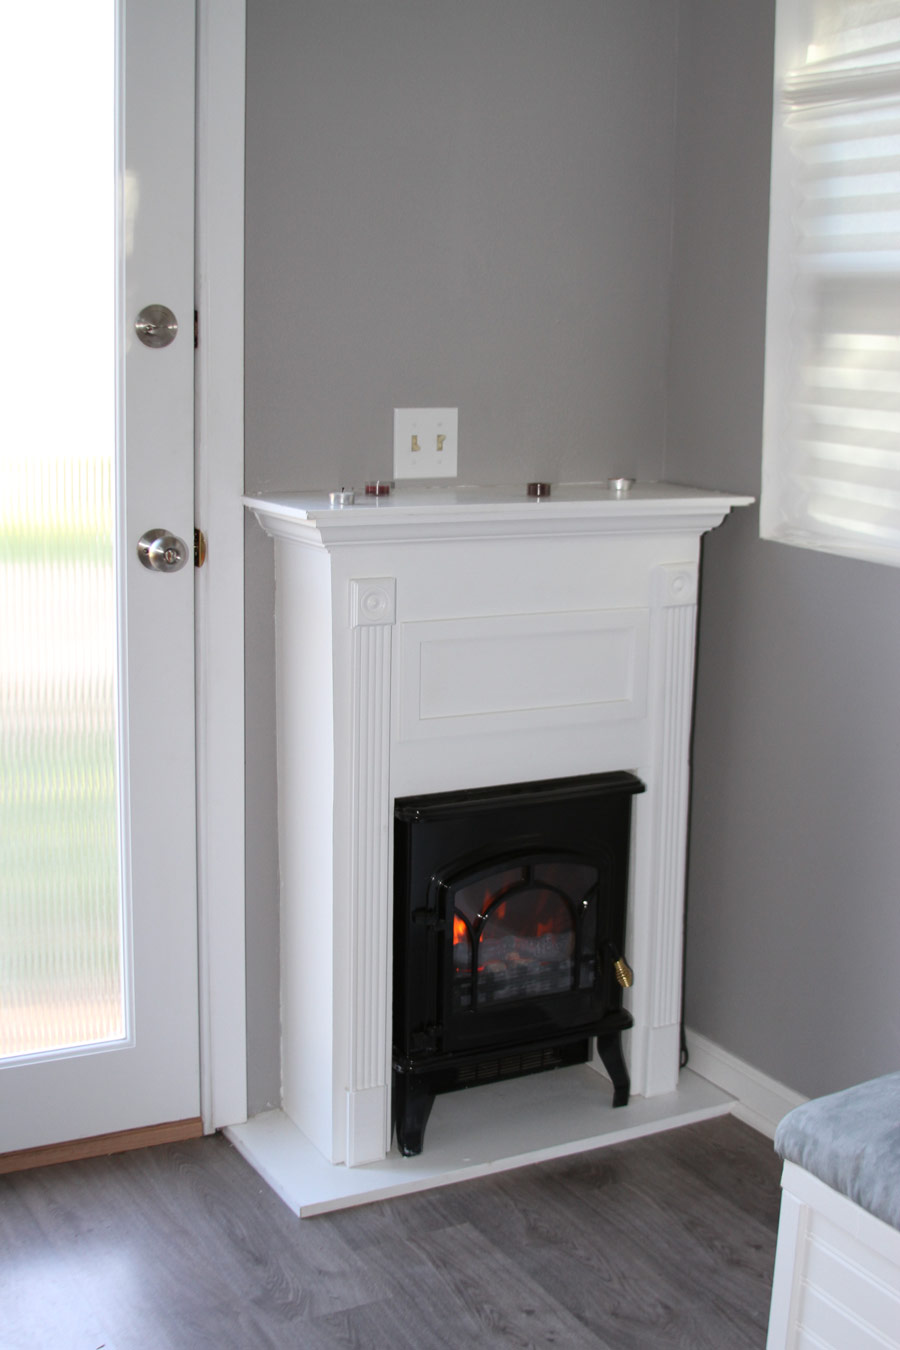 Mobile Home Fireplace Insert New Pin by Linda Wallace On Decorating Country Cottage In